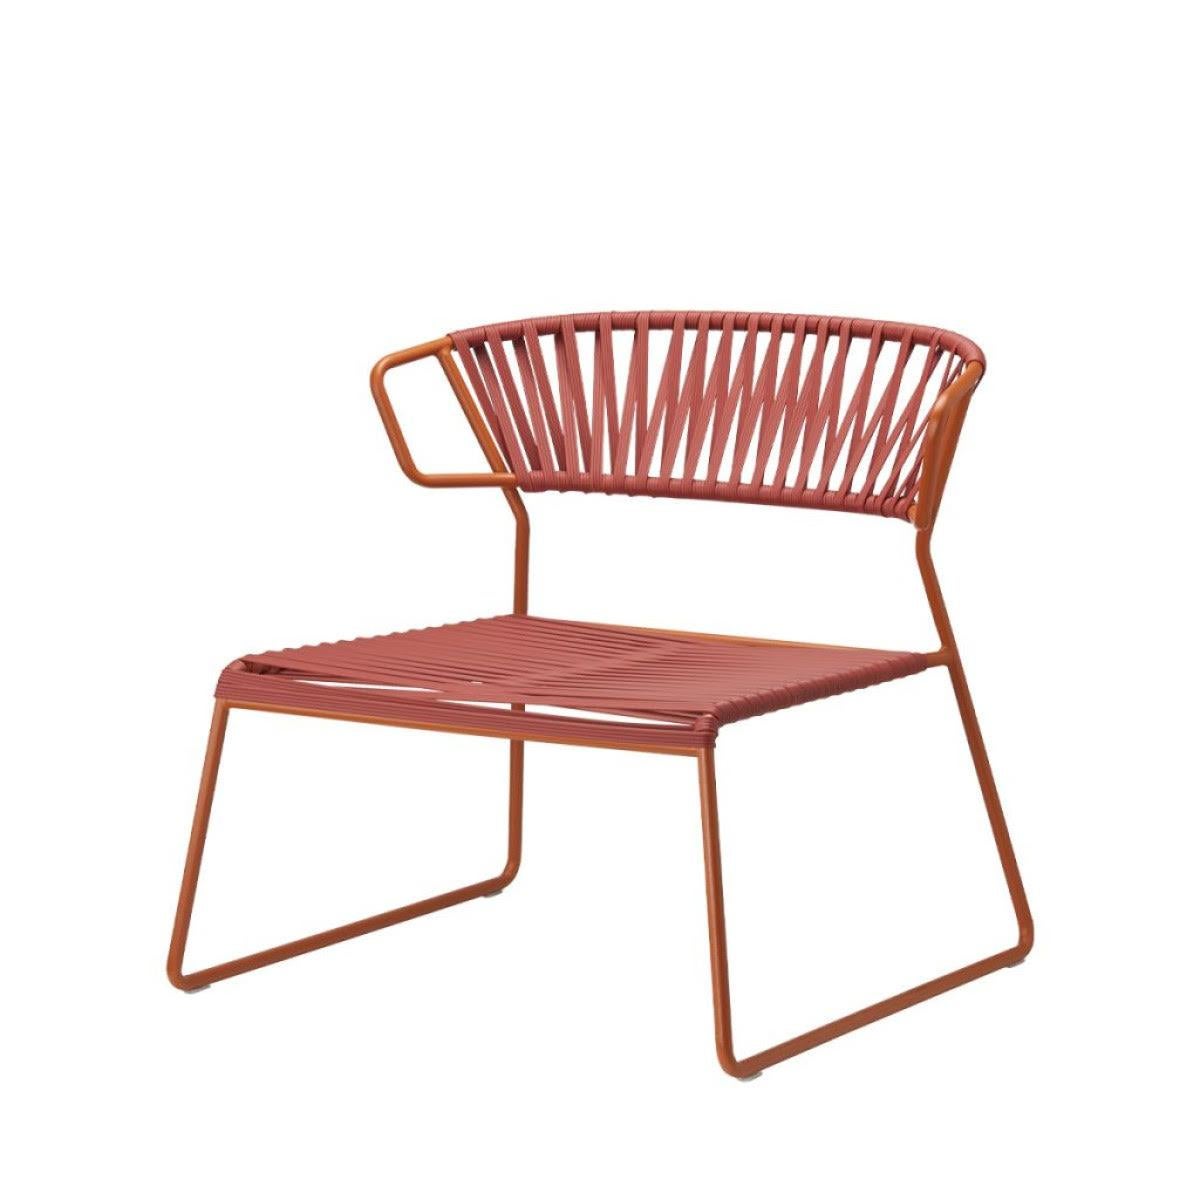 Modern Pink Terracotta Armchair Outdoor or Indoor in Metal and Ropes, 21 century For Sale 1